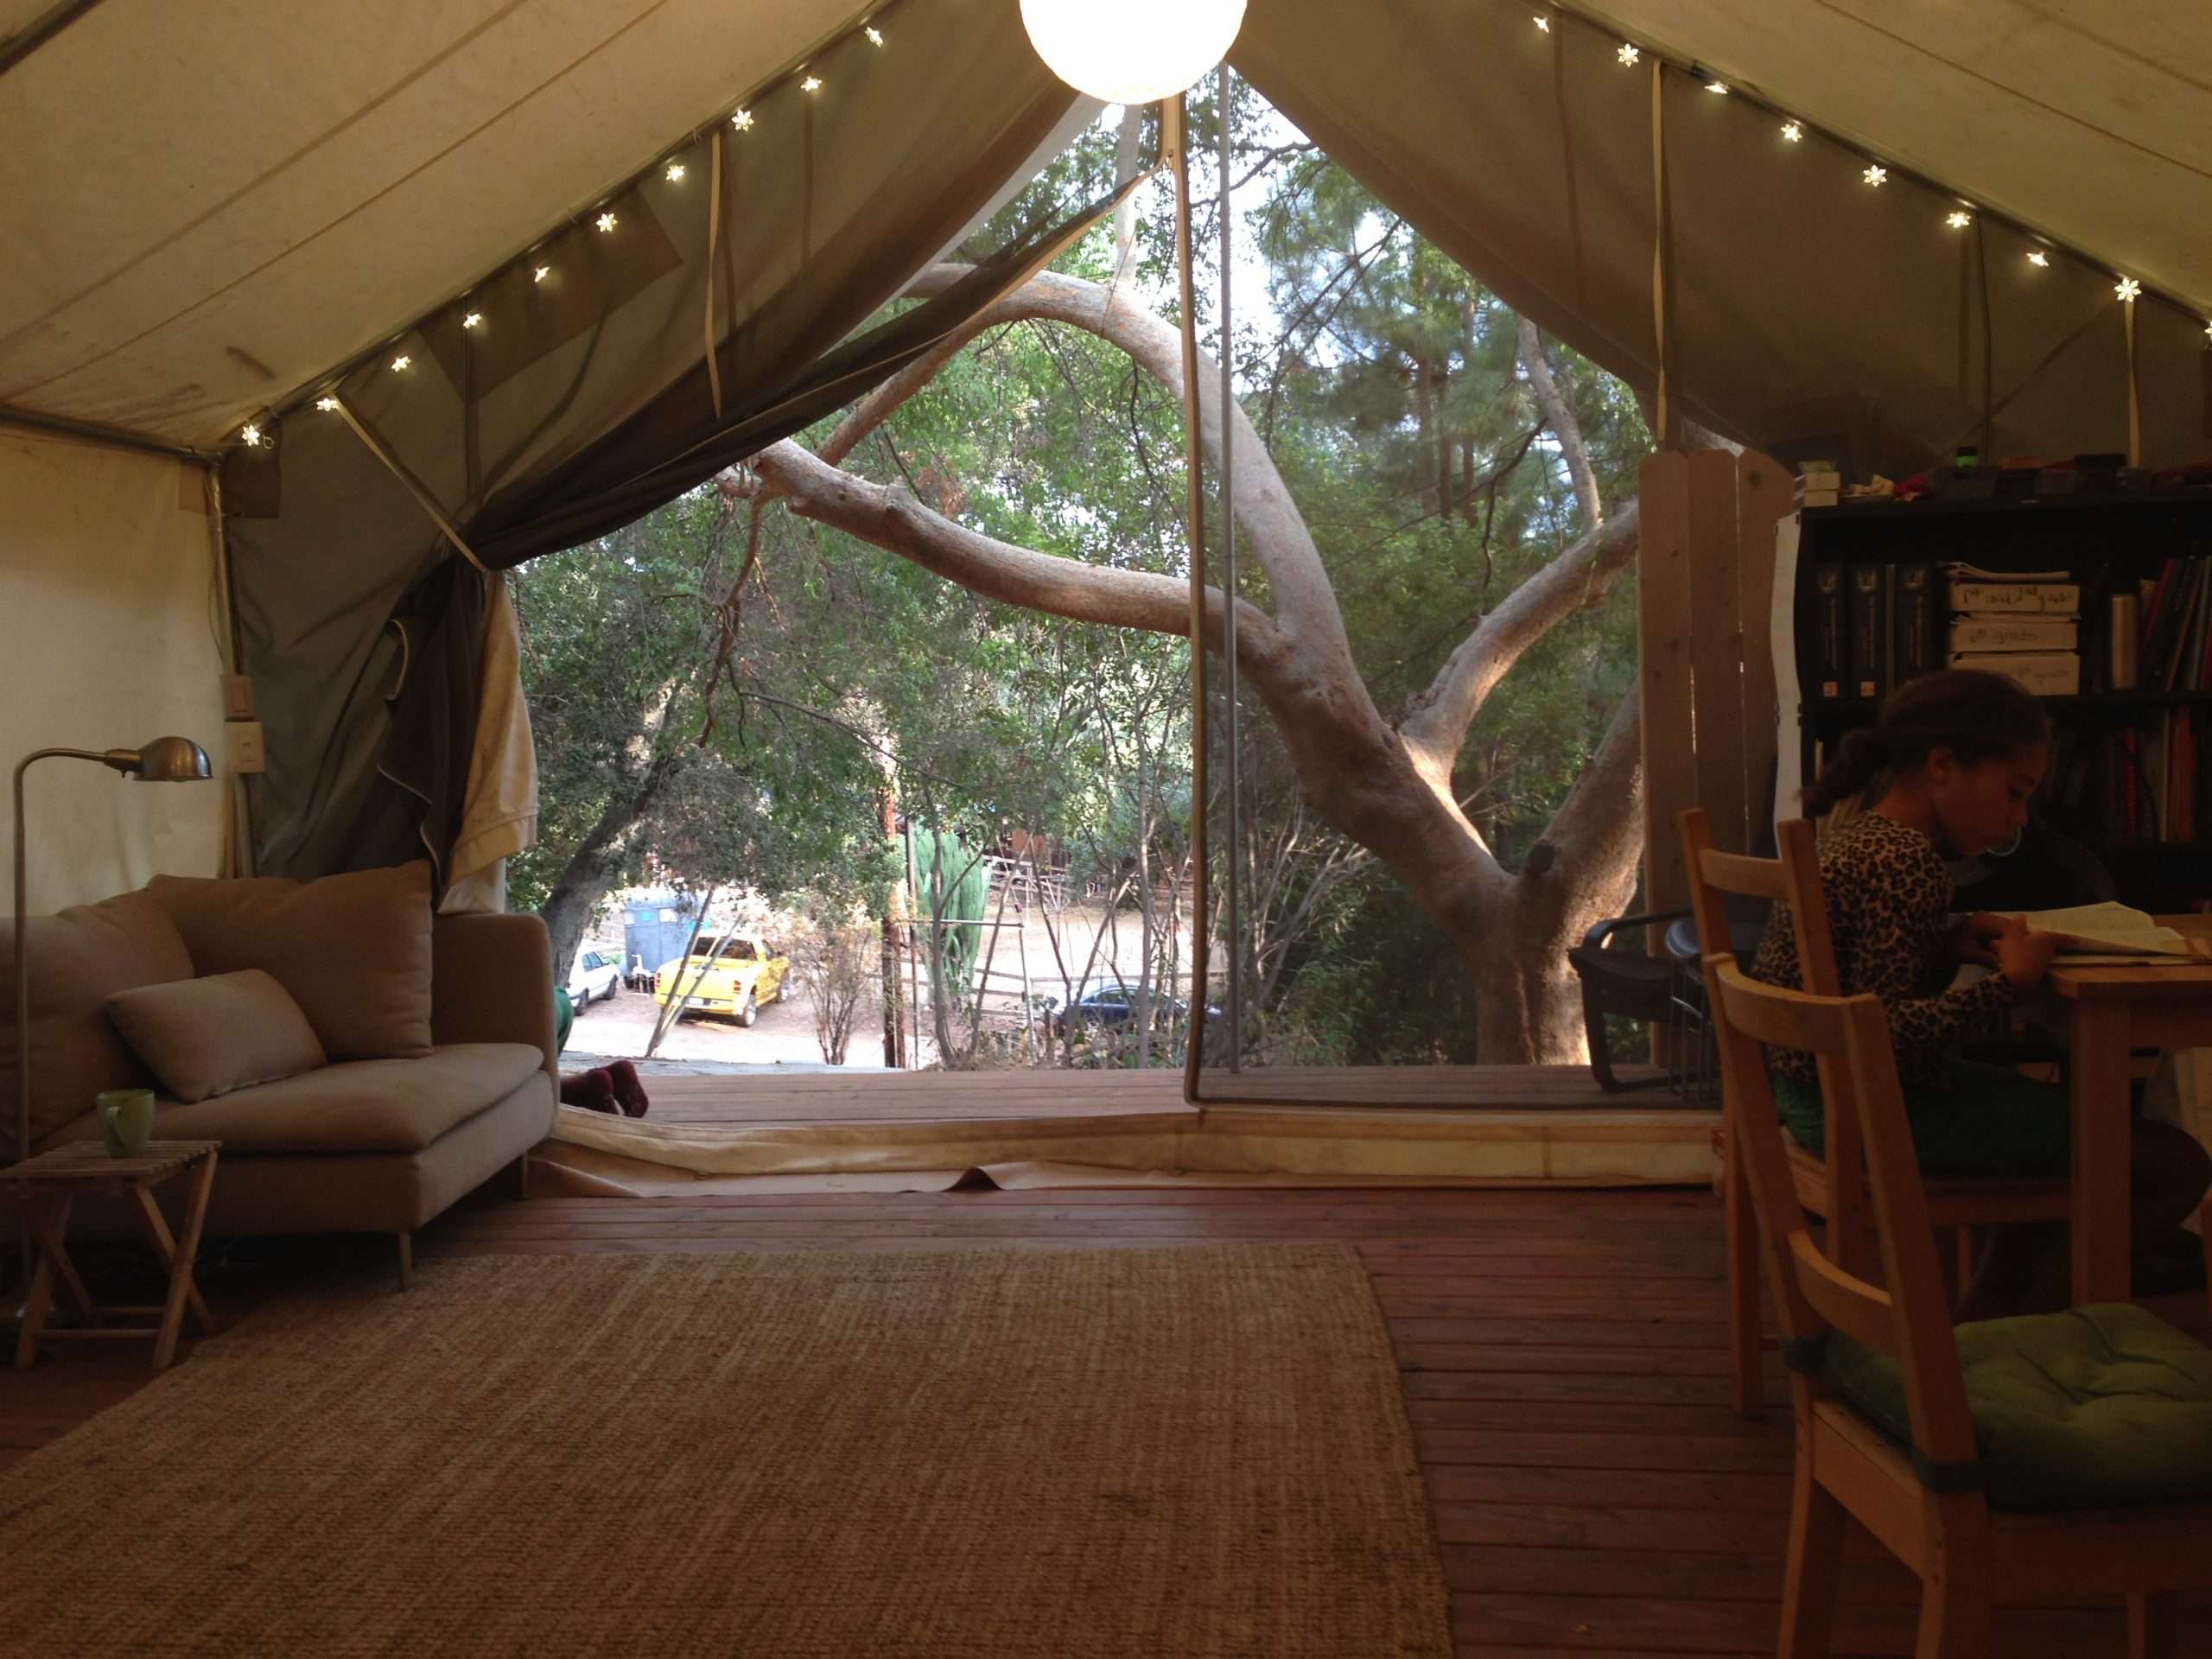 Higher Learning and Creativity in Our Colorado Lodge Tent ...